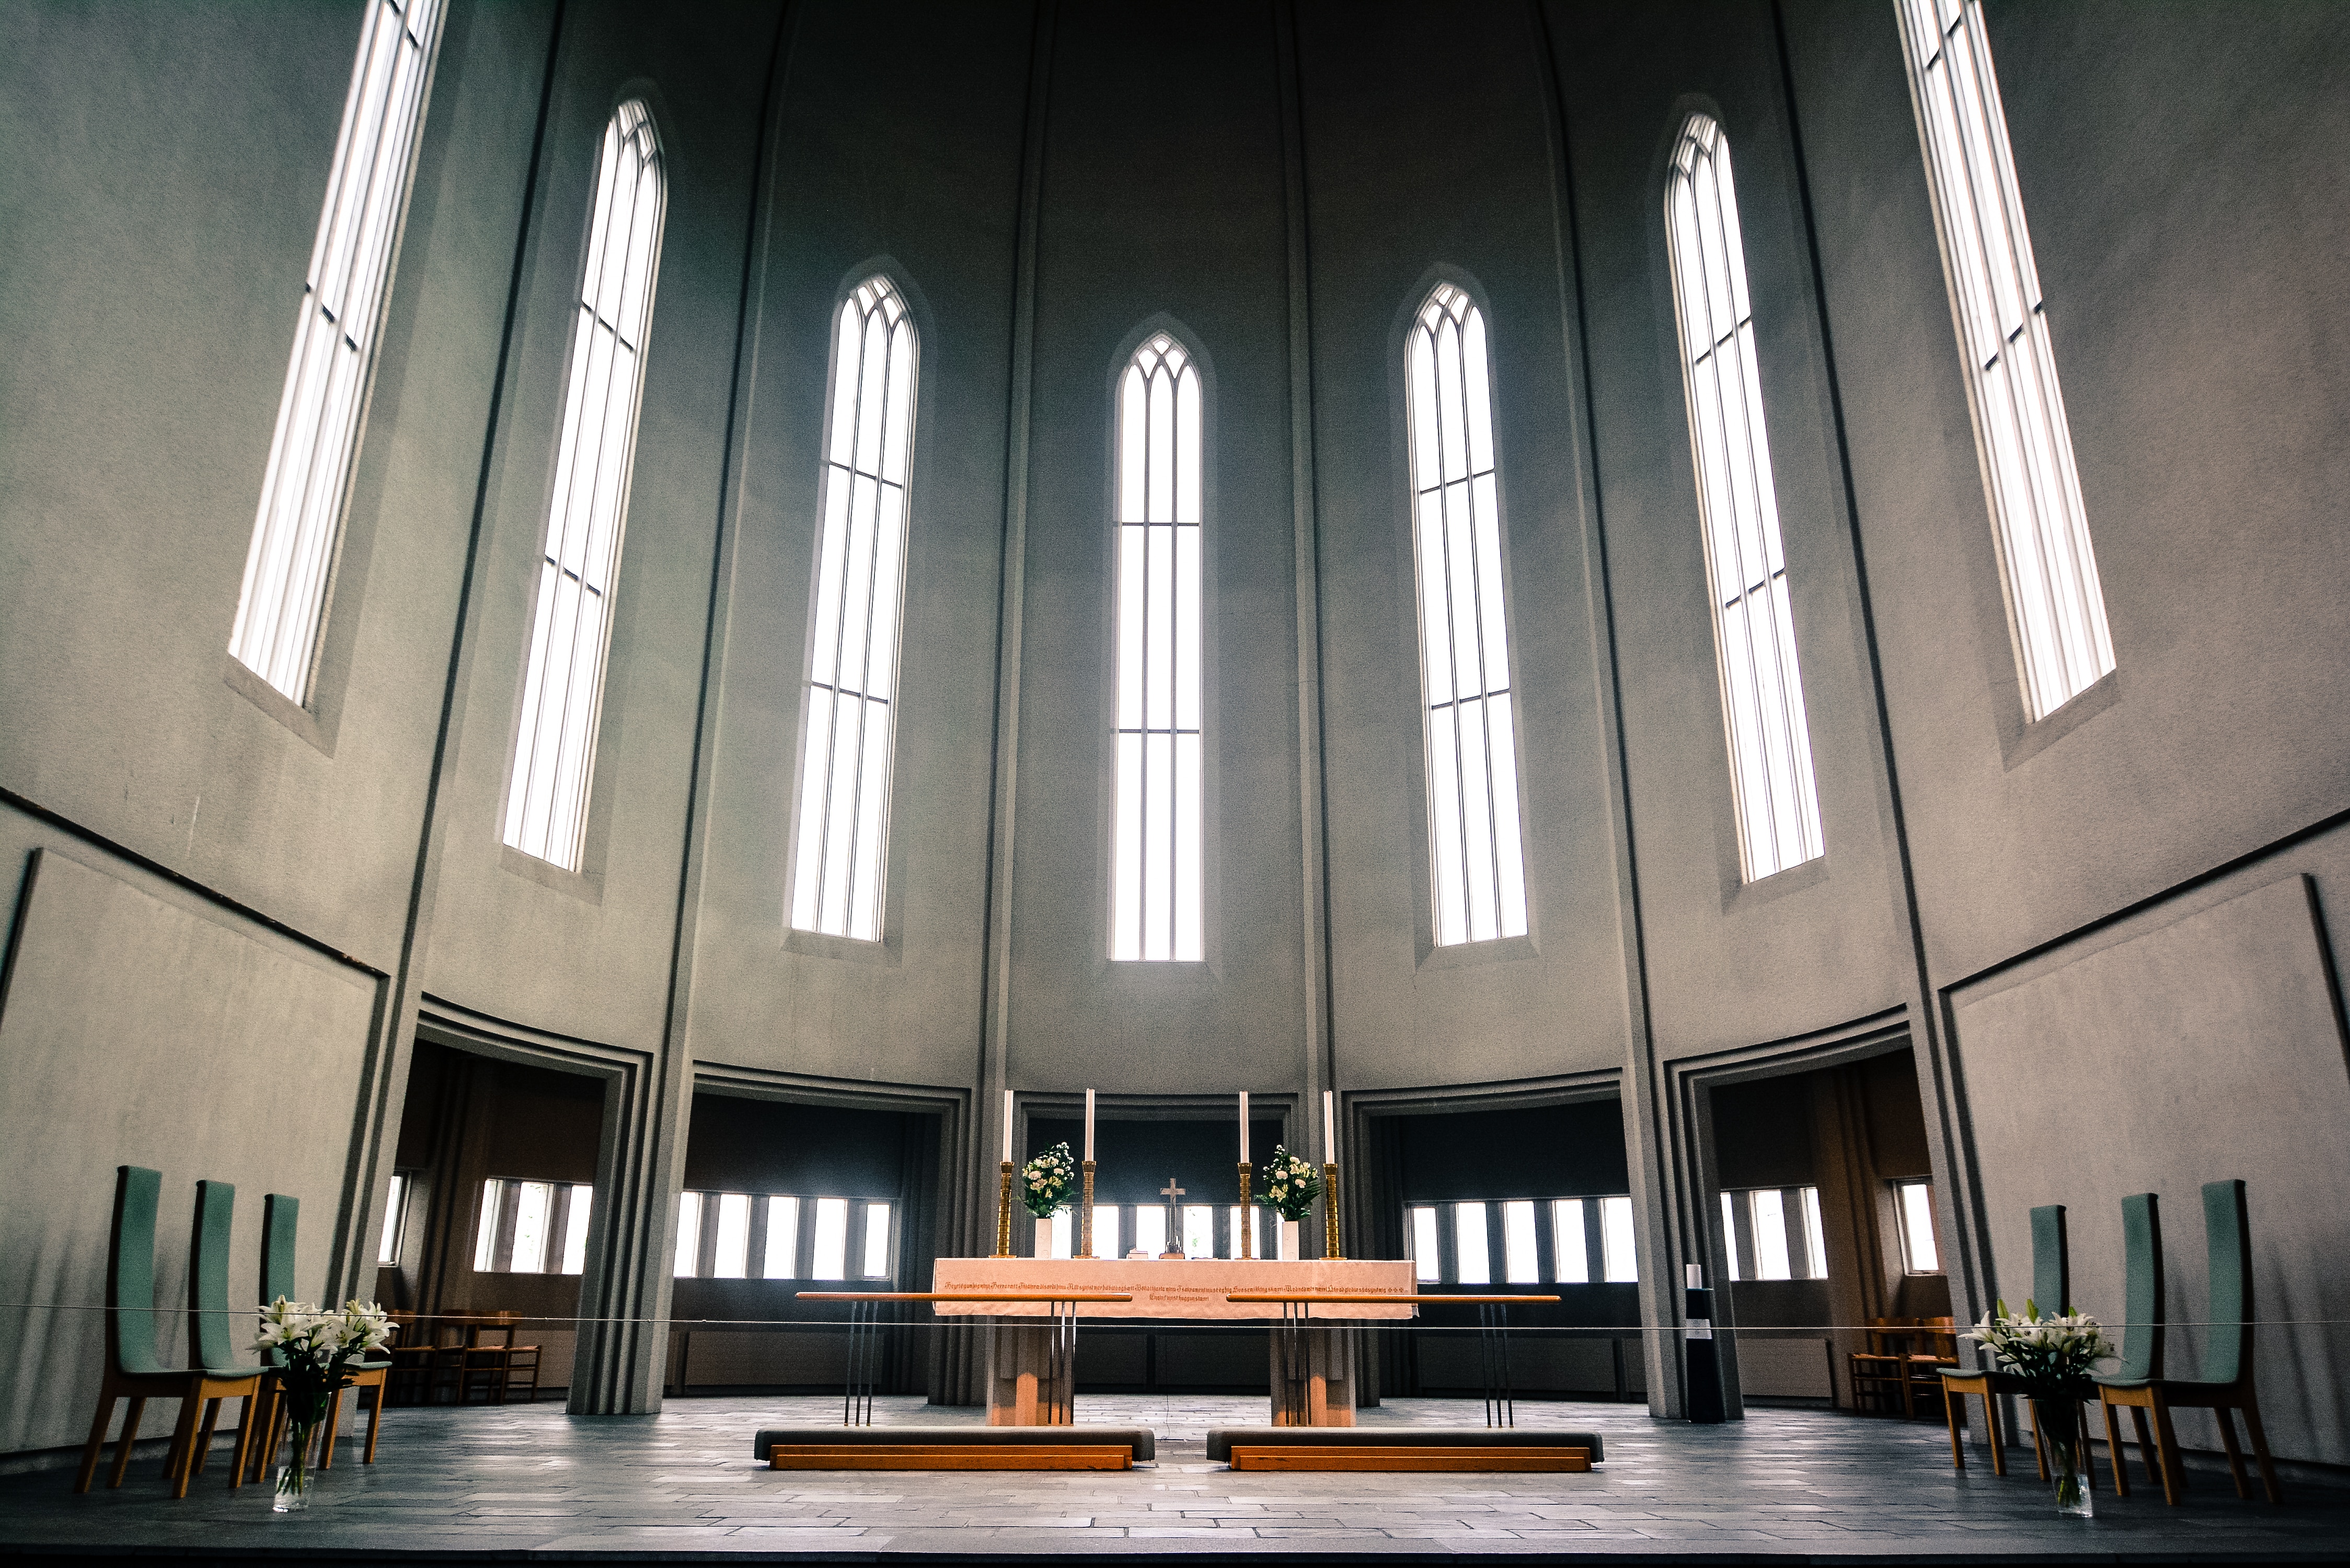 brown wooden altar inside gray dome church